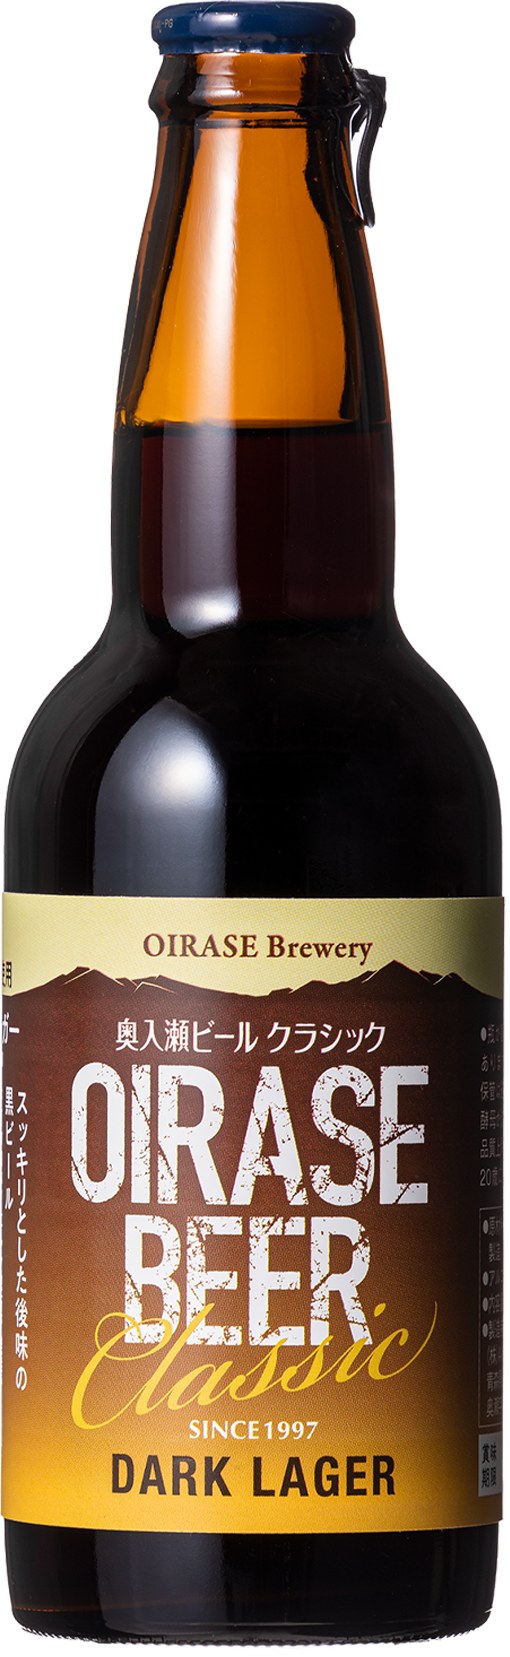 OIRASE BEER image2